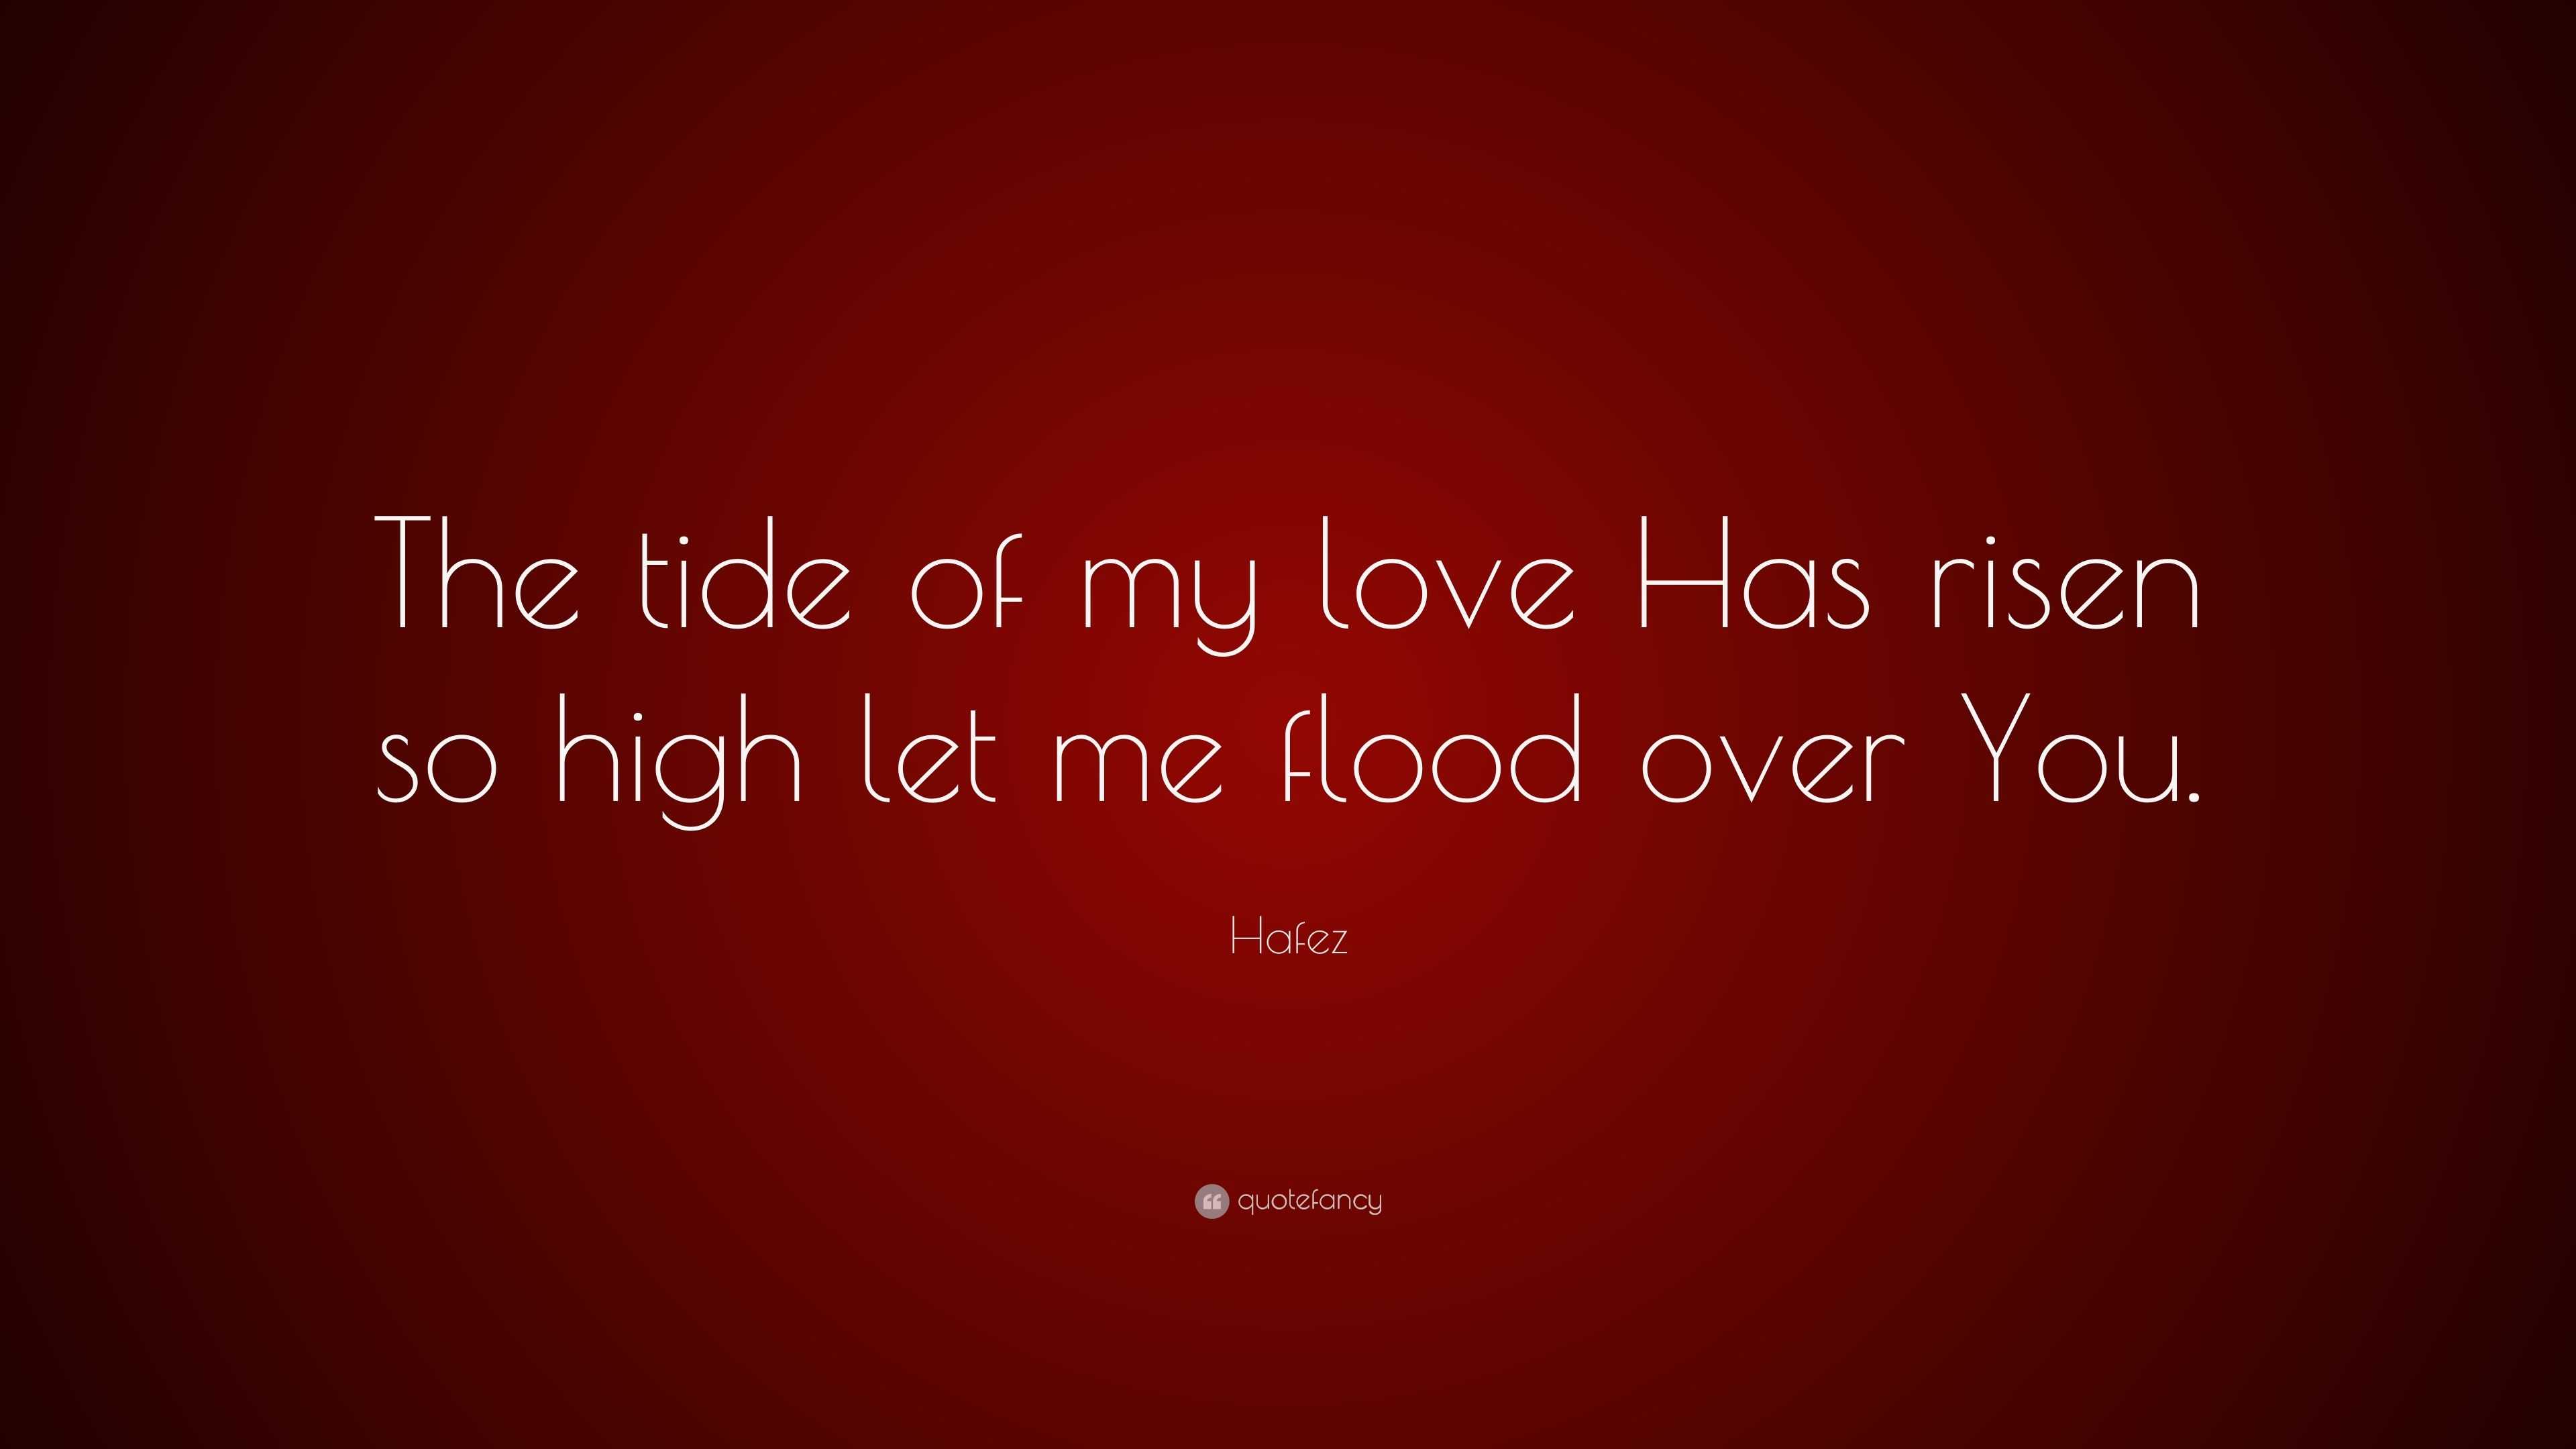 Hafez Quote: “The tide of my love Has risen so high let me flood